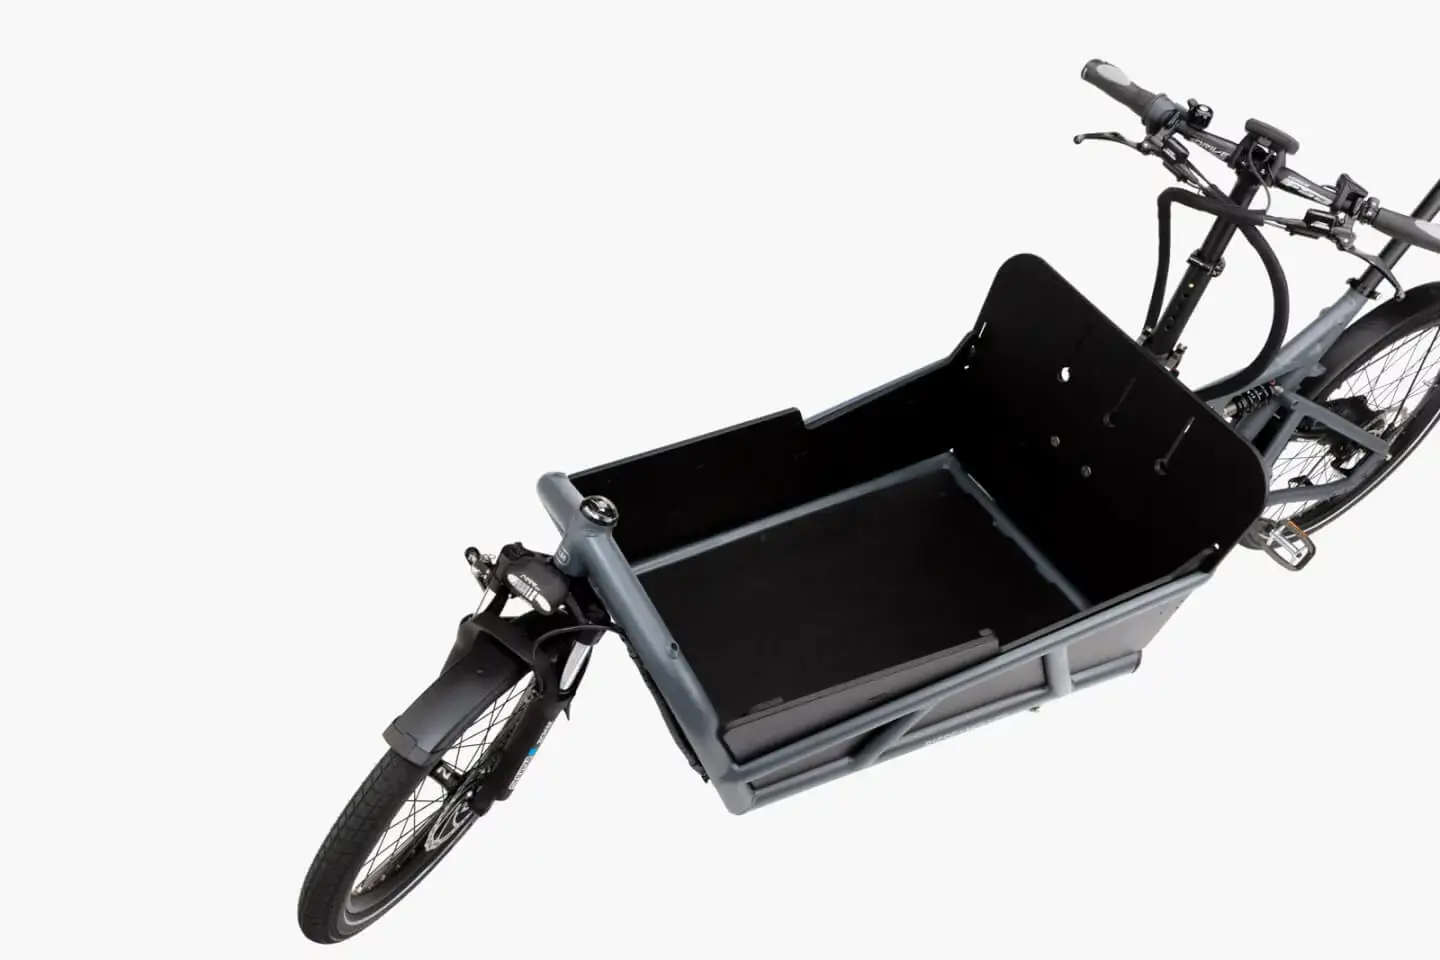 Riese & Muller Load 75 Cargo Area Box for sale - Propel E-Bikes